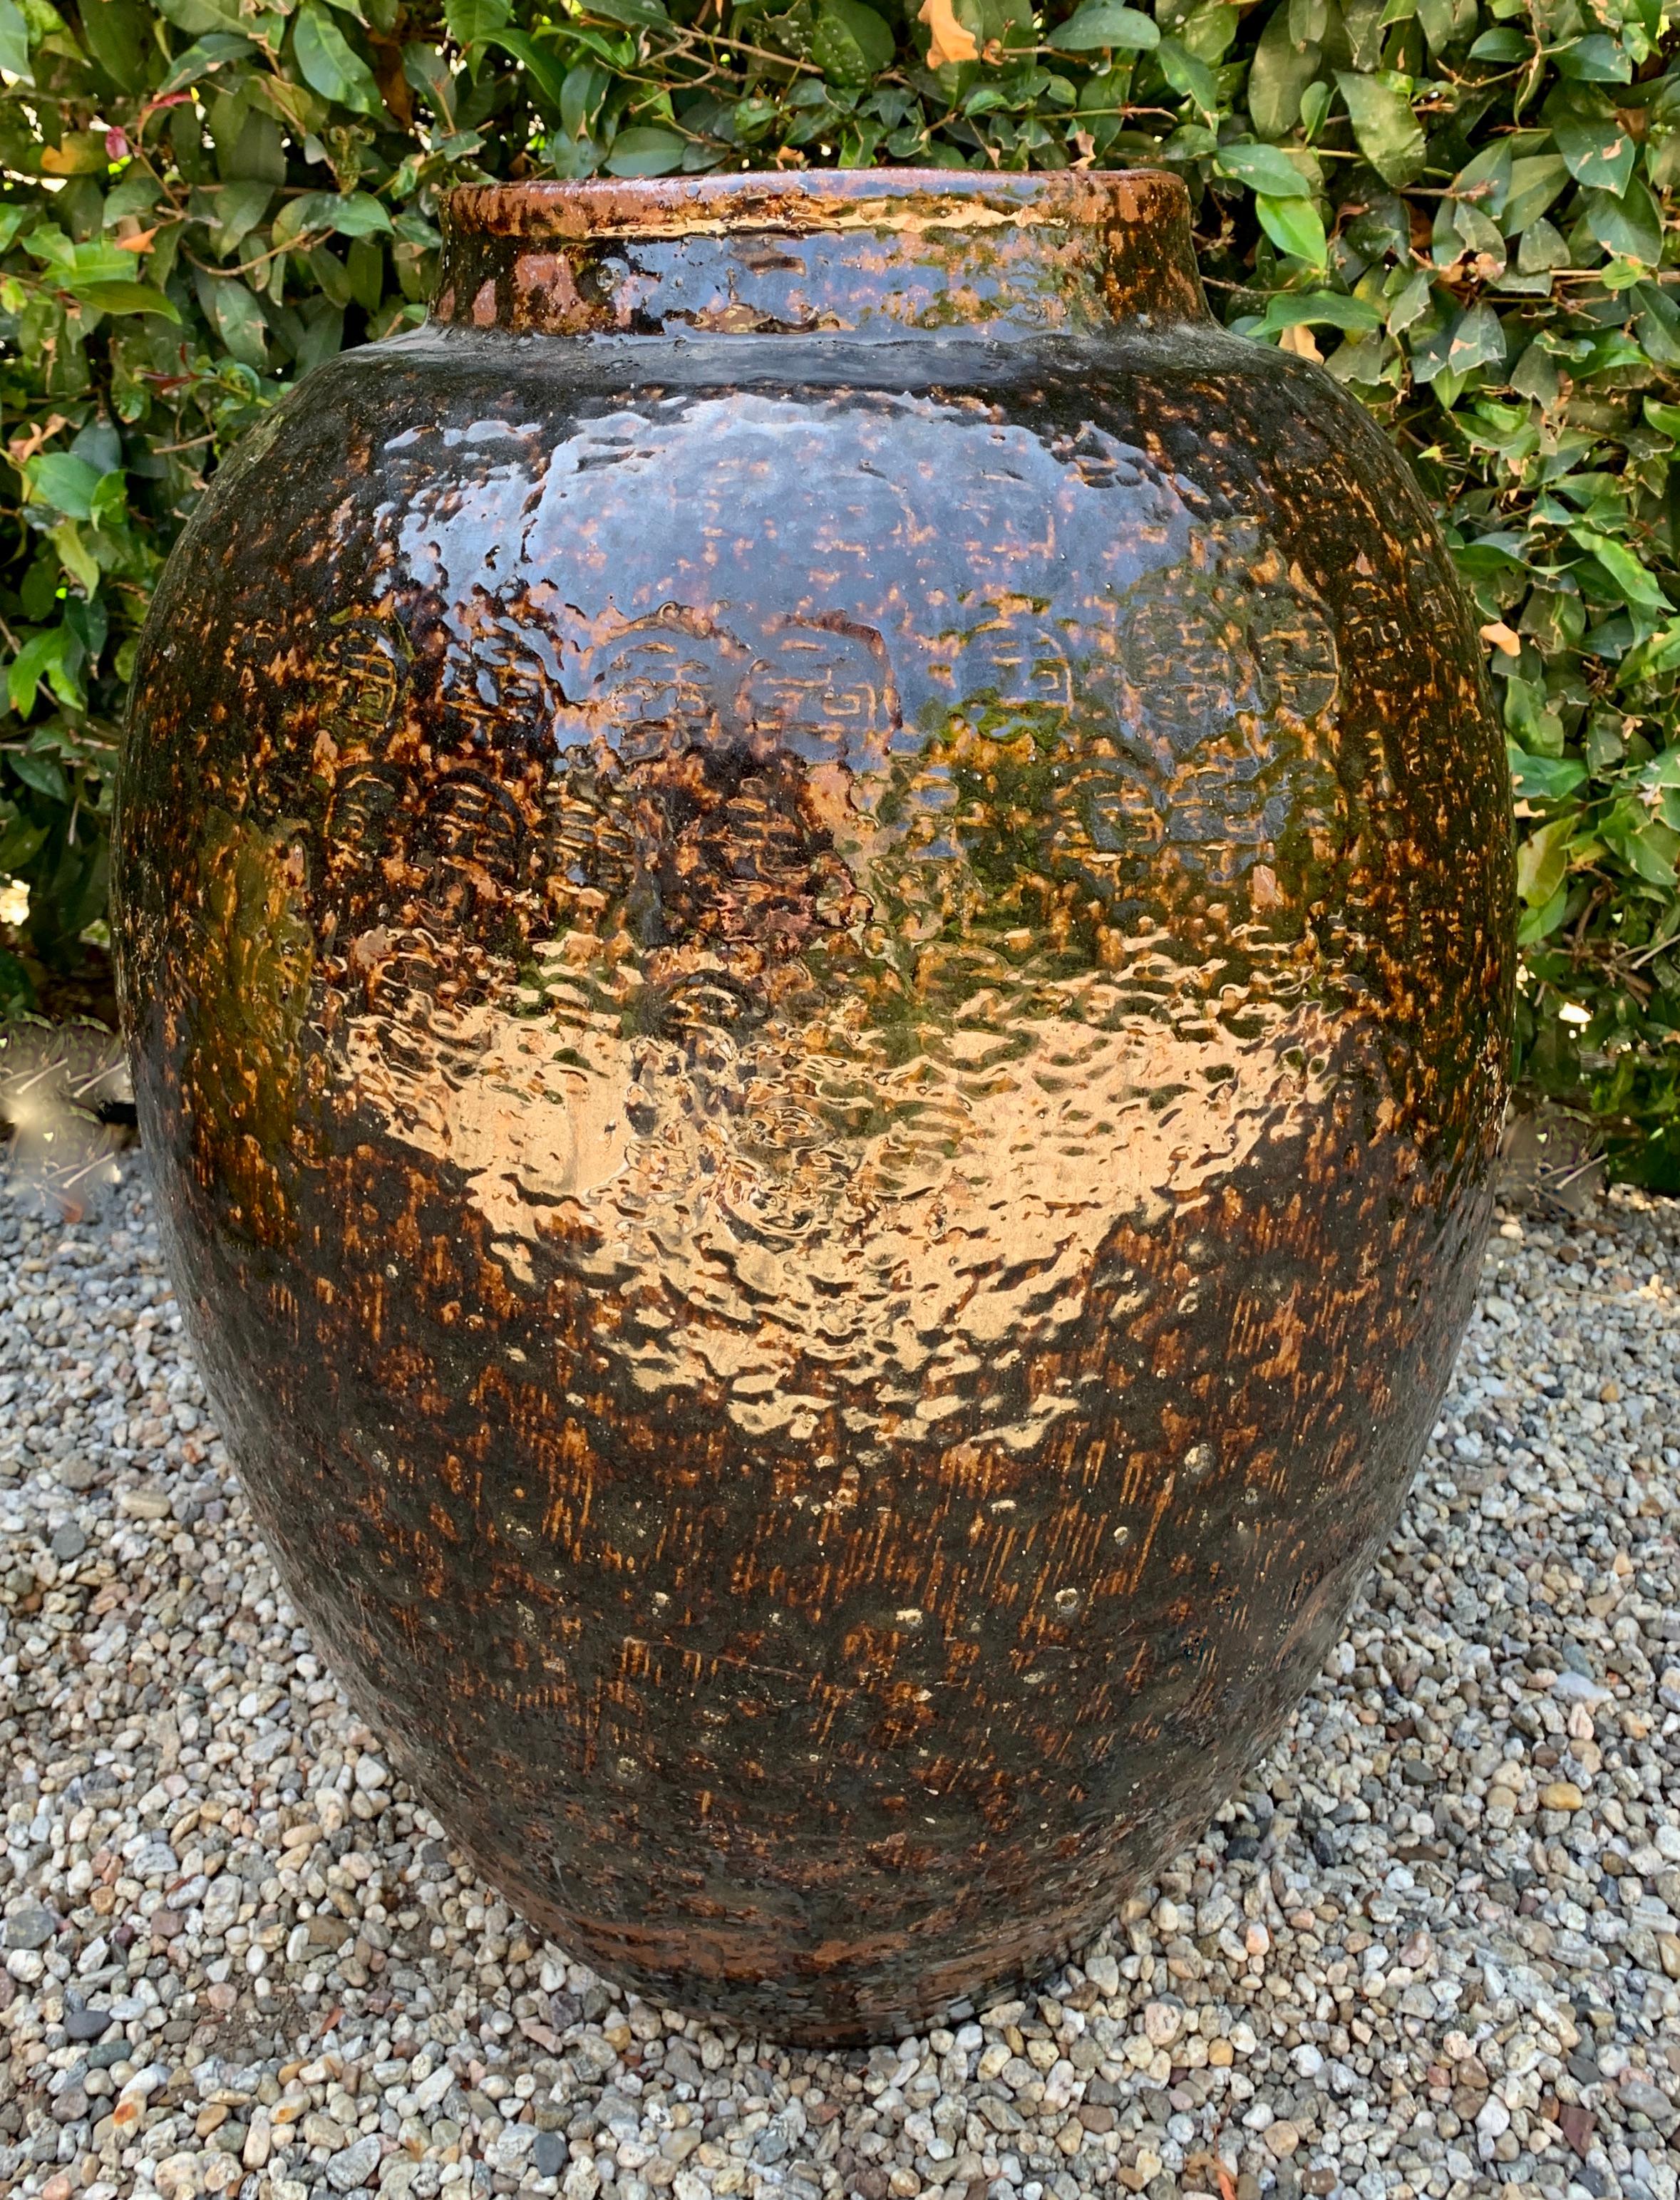 Chinese glazed terracotta urn or planter - a wonderful glazed container for the garden or interior. A heavy glaze with some motifs showing through.